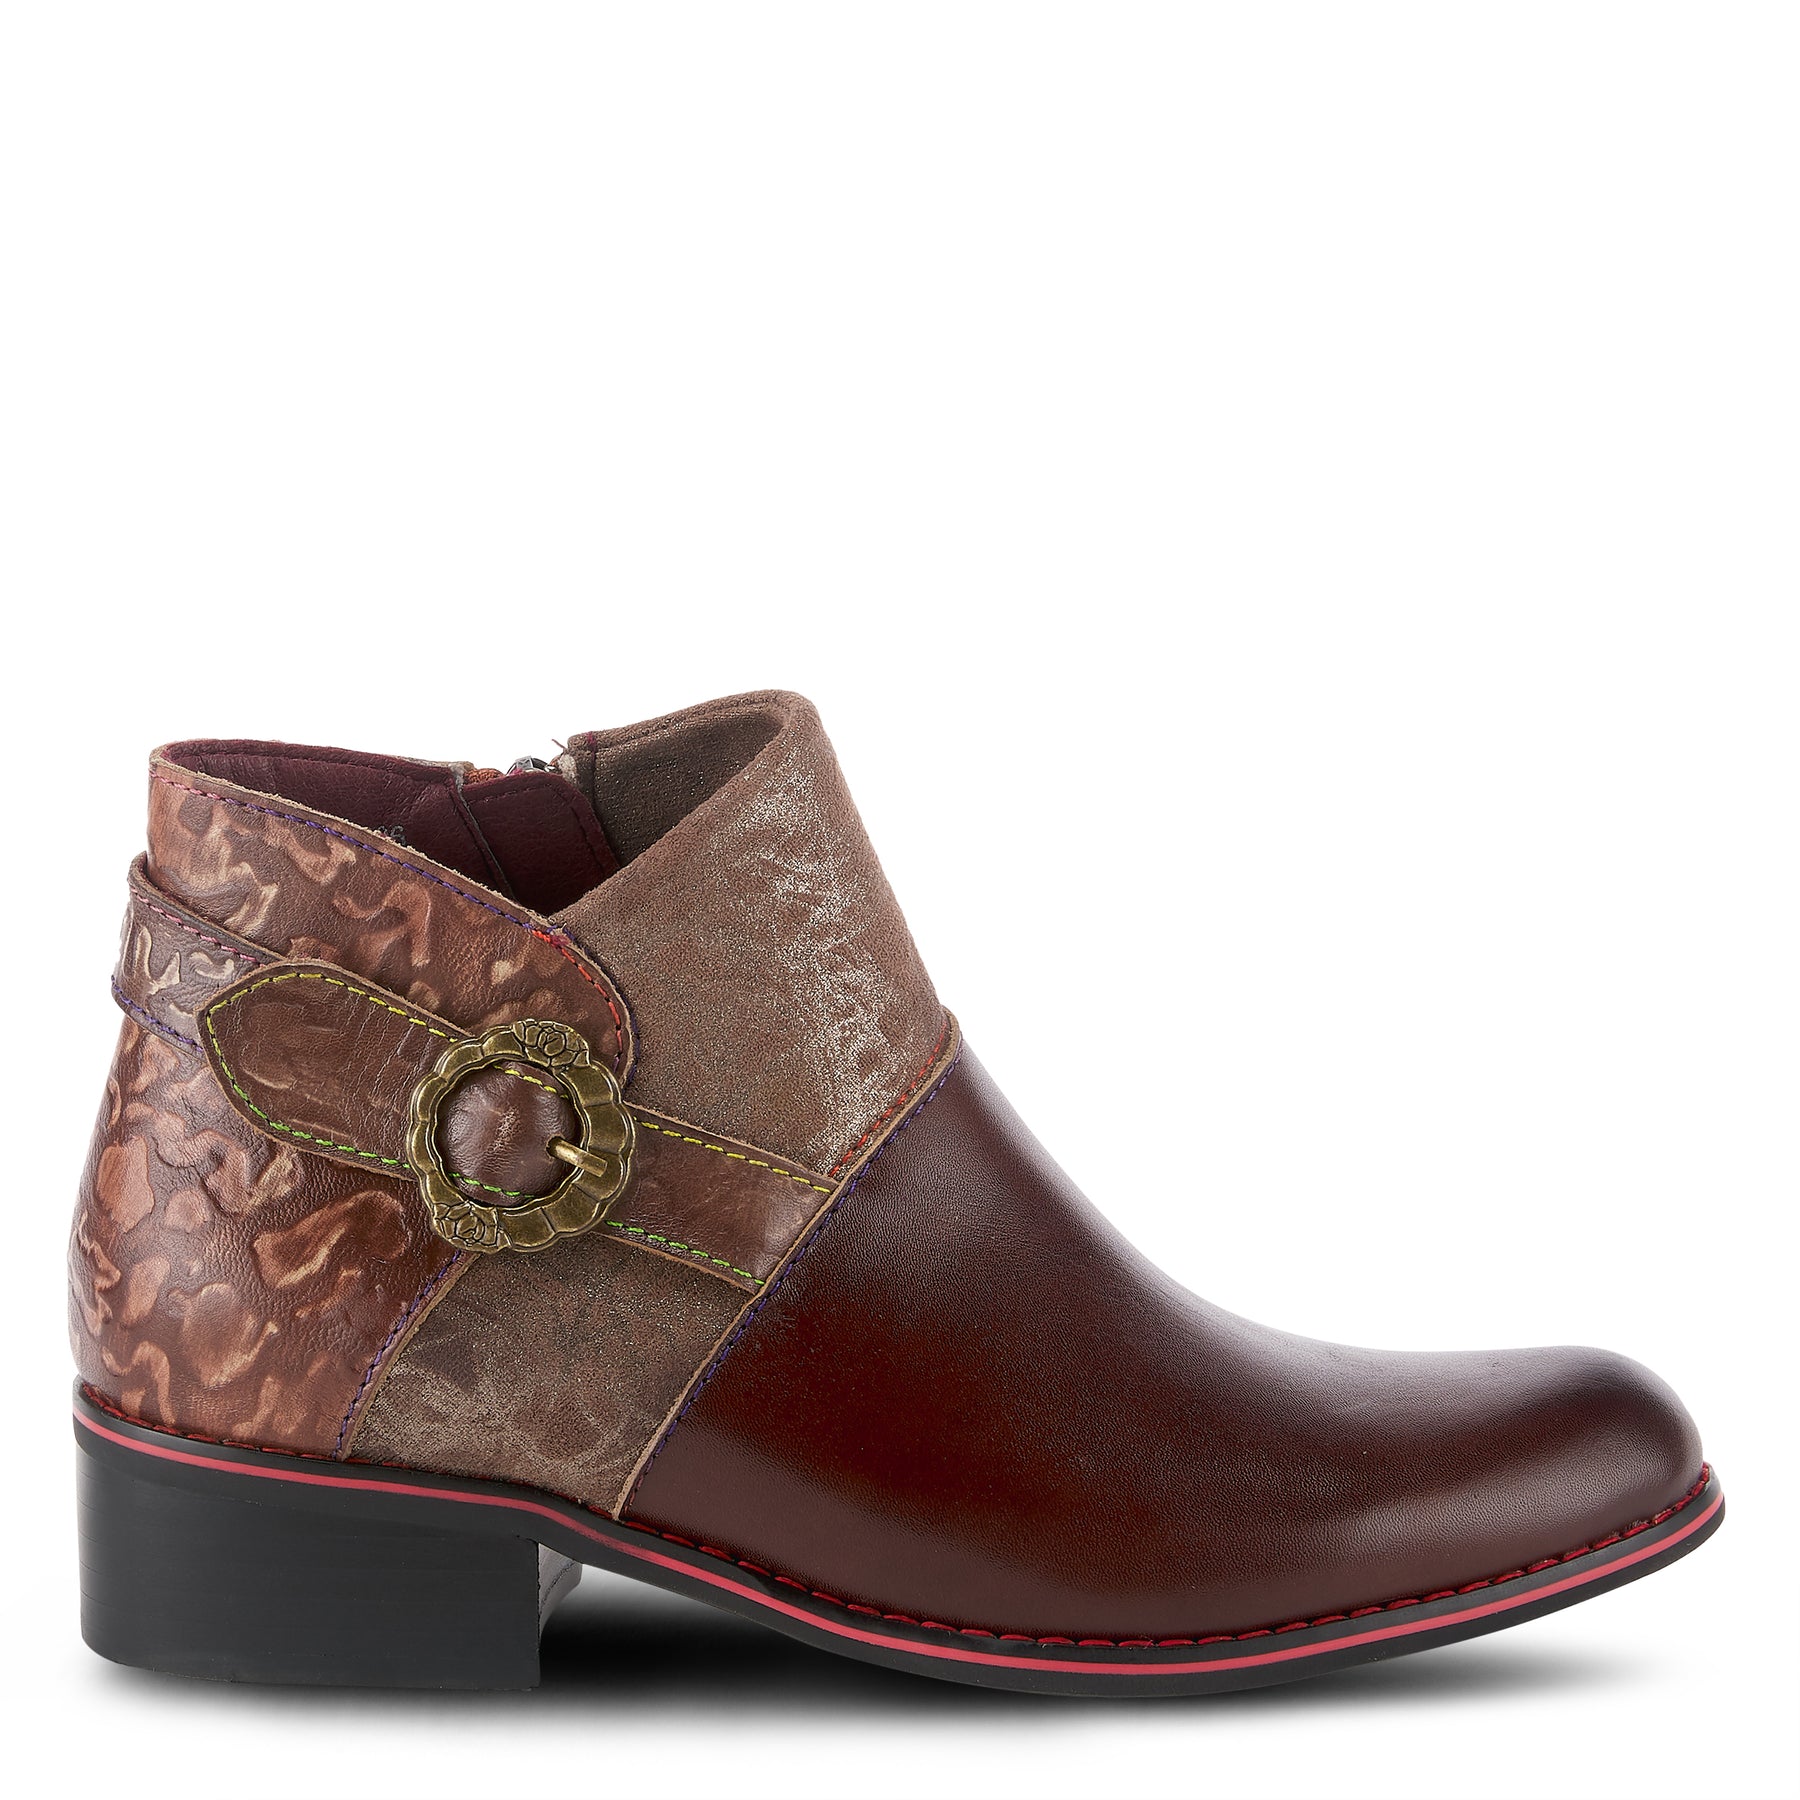 tiaga leather ankle boots